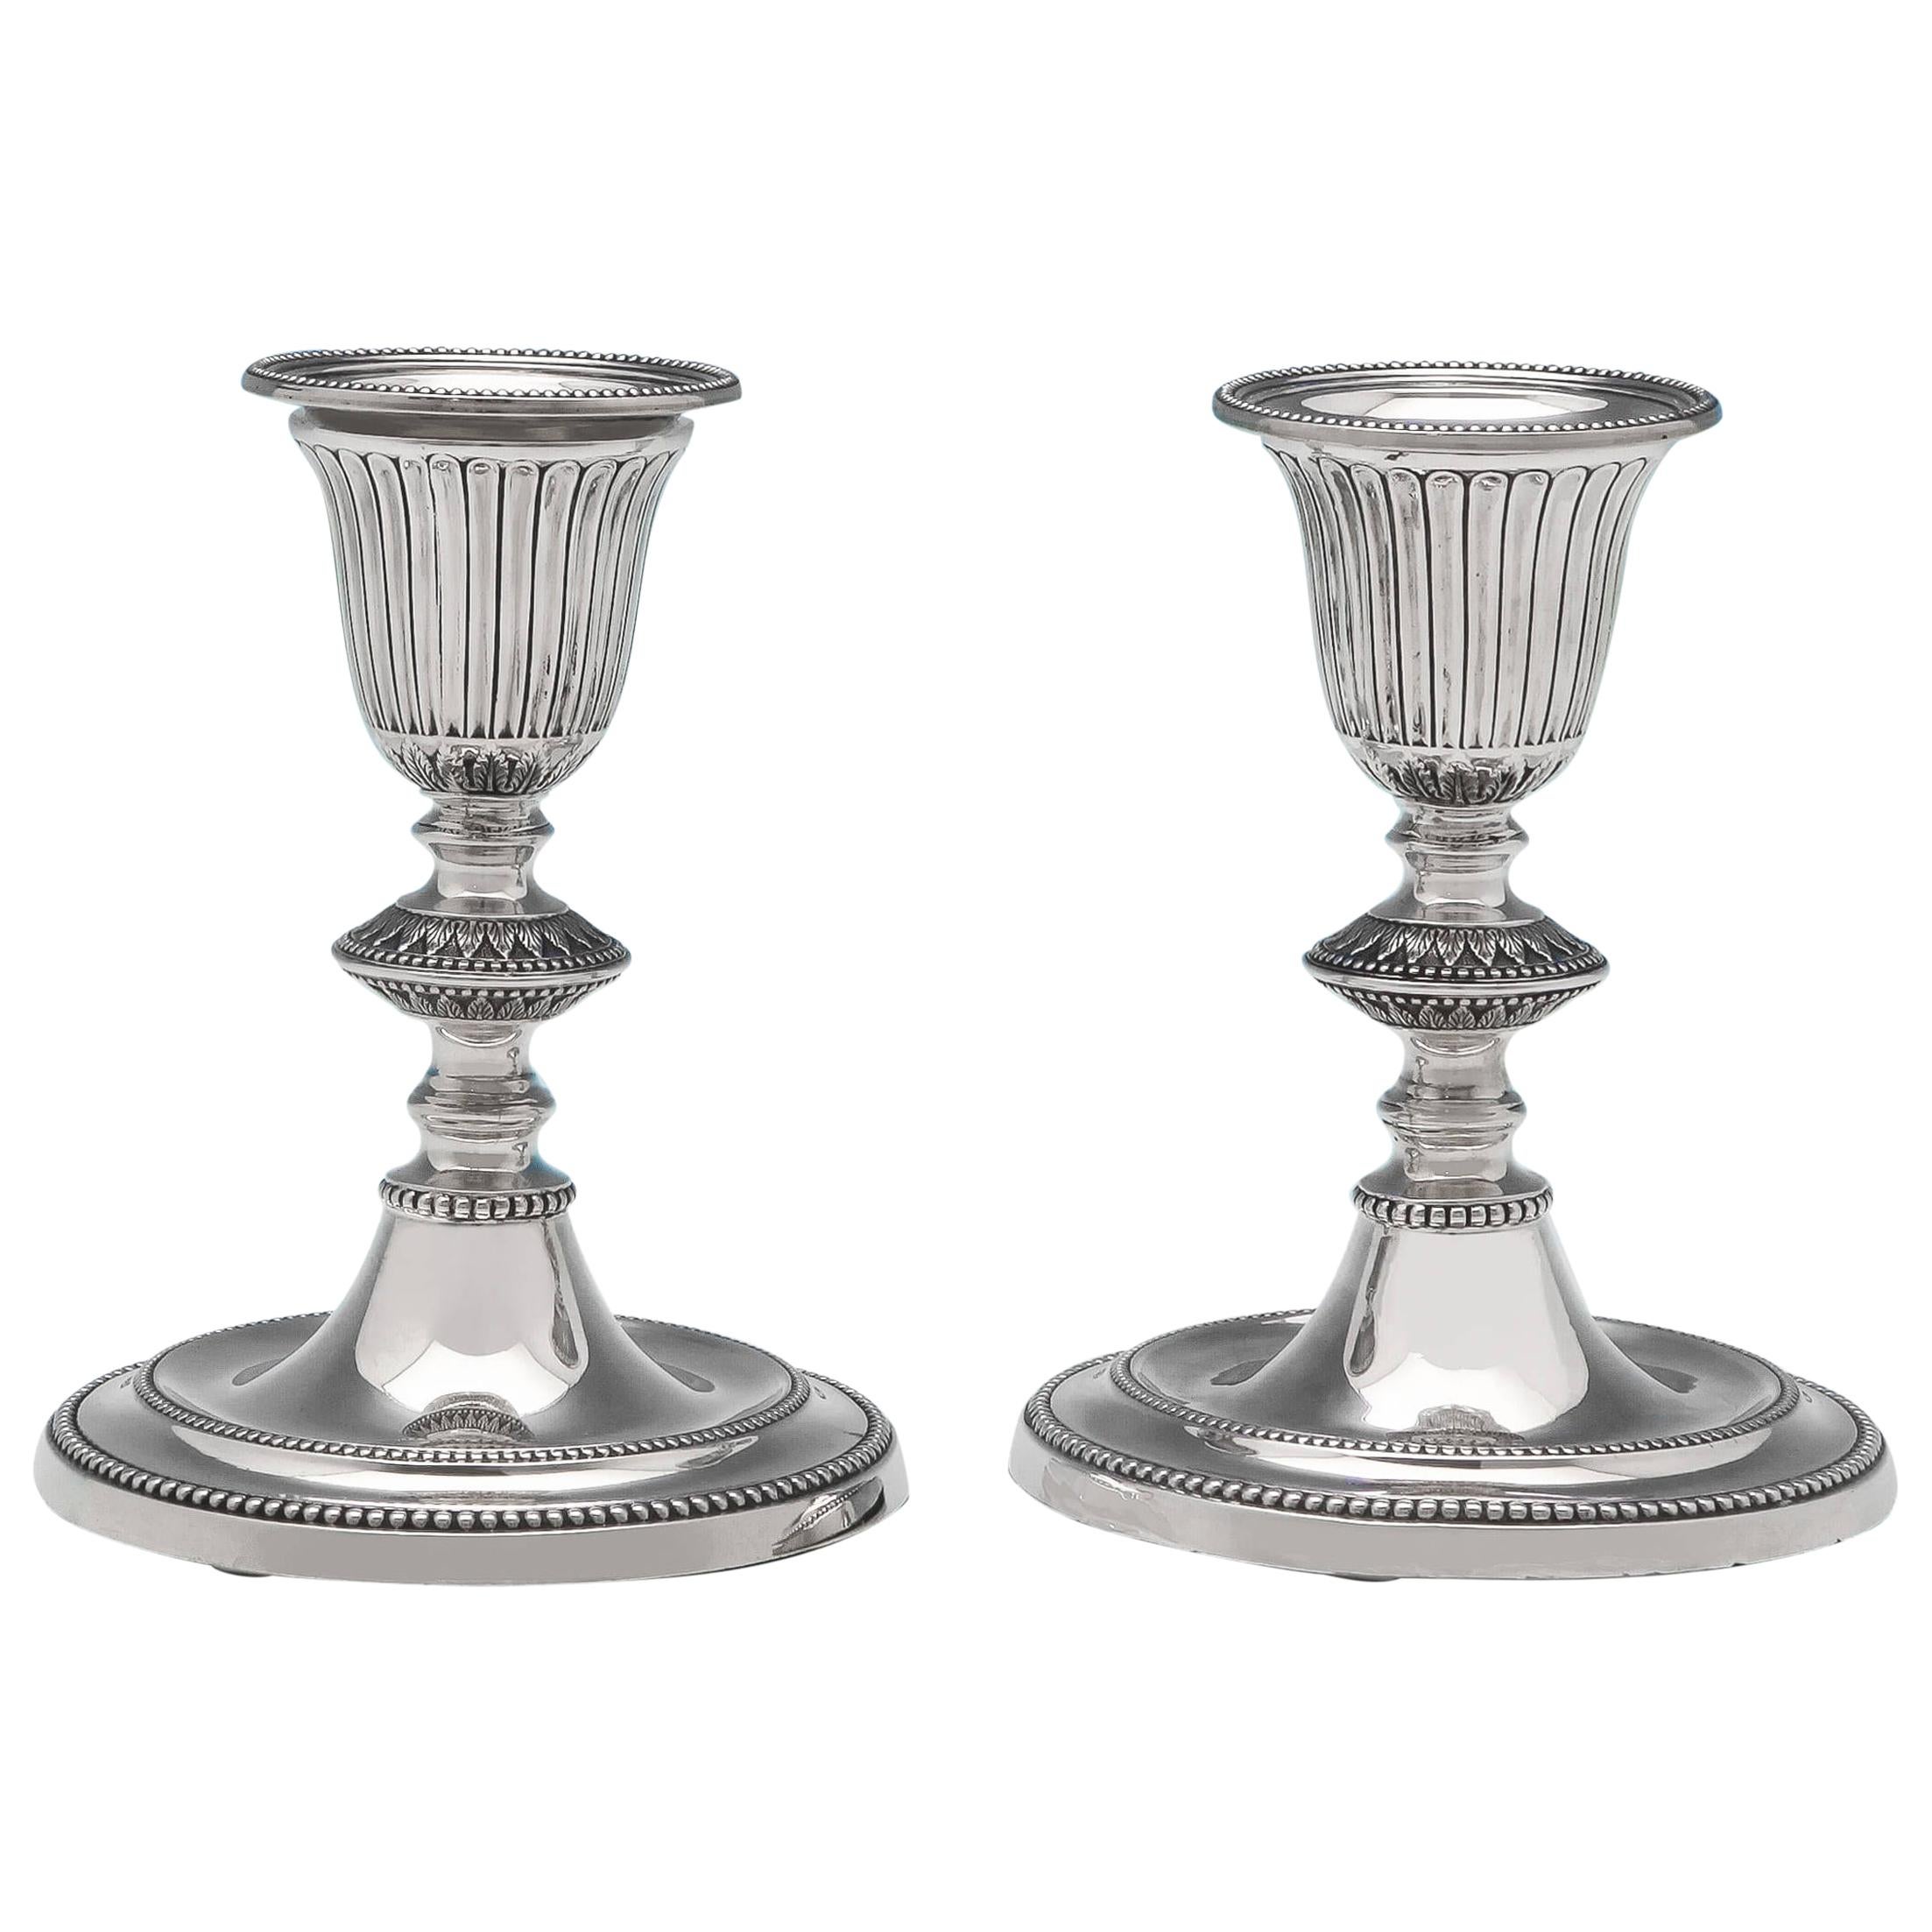 19th Century Victorian Neoclassical Revival Sterling Silver Pair of Candlesticks